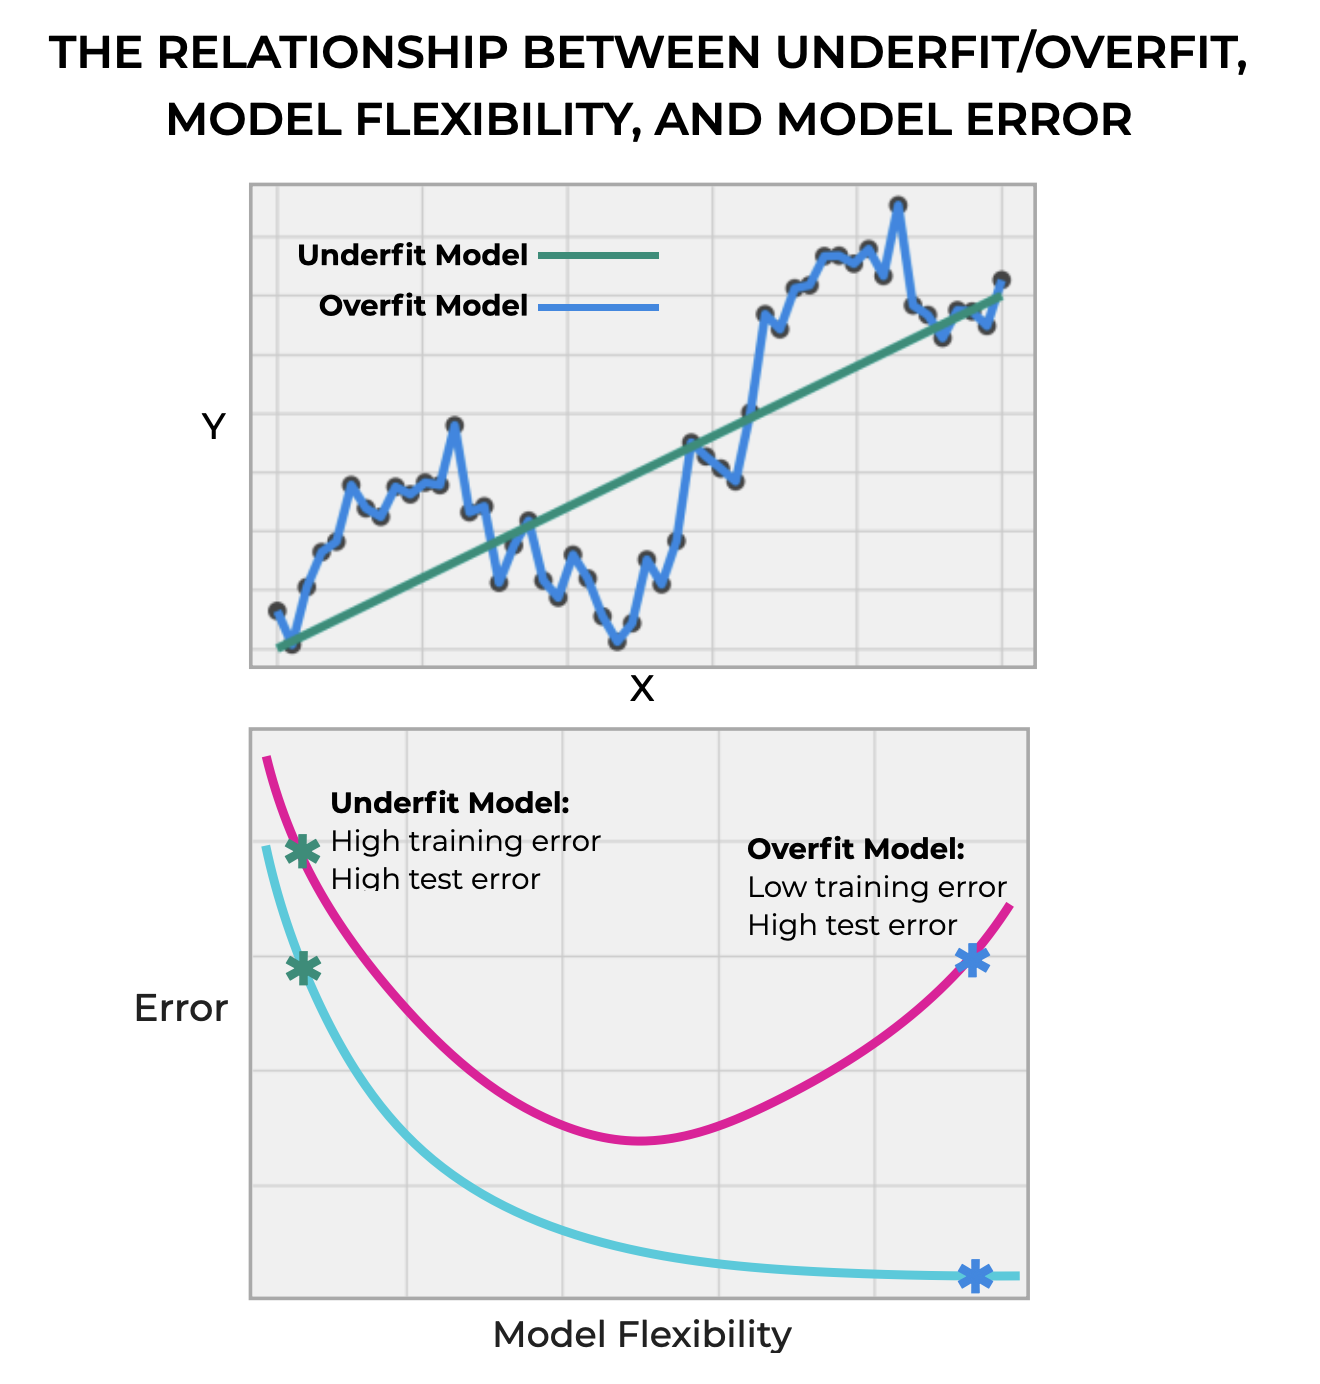 An image with two charts that collectively show the relationship between model flexibility, underfit/overfit, and model error.